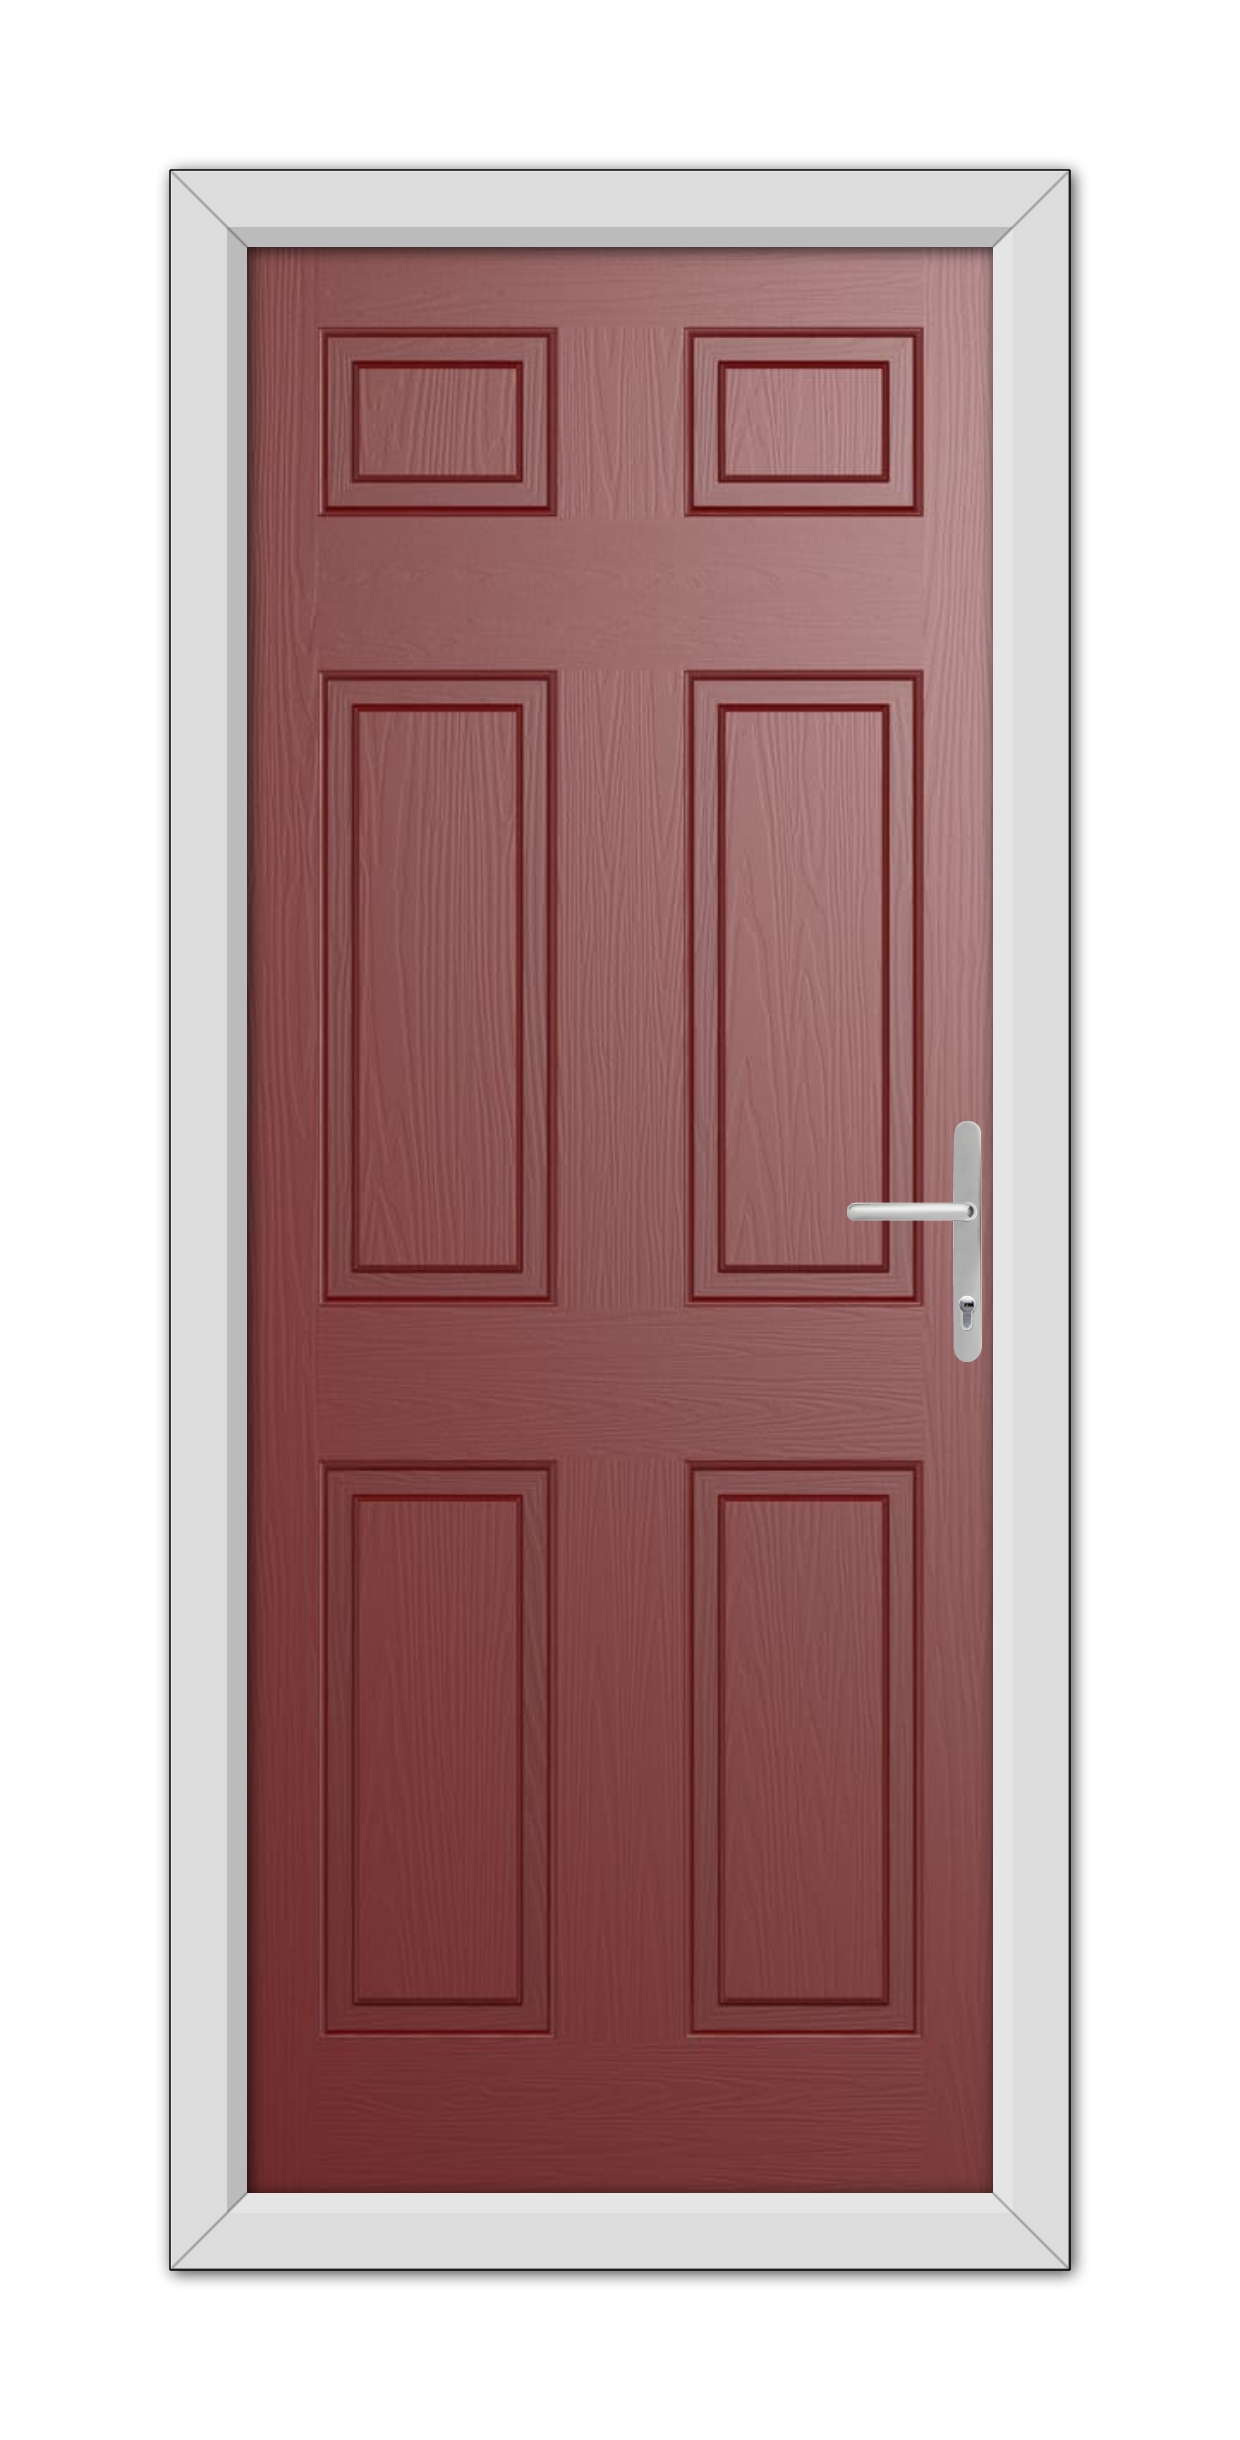 A modern Red Middleton Solid Composite Door 48mm Timber Core with six panels and a silver handle, set in a white frame.